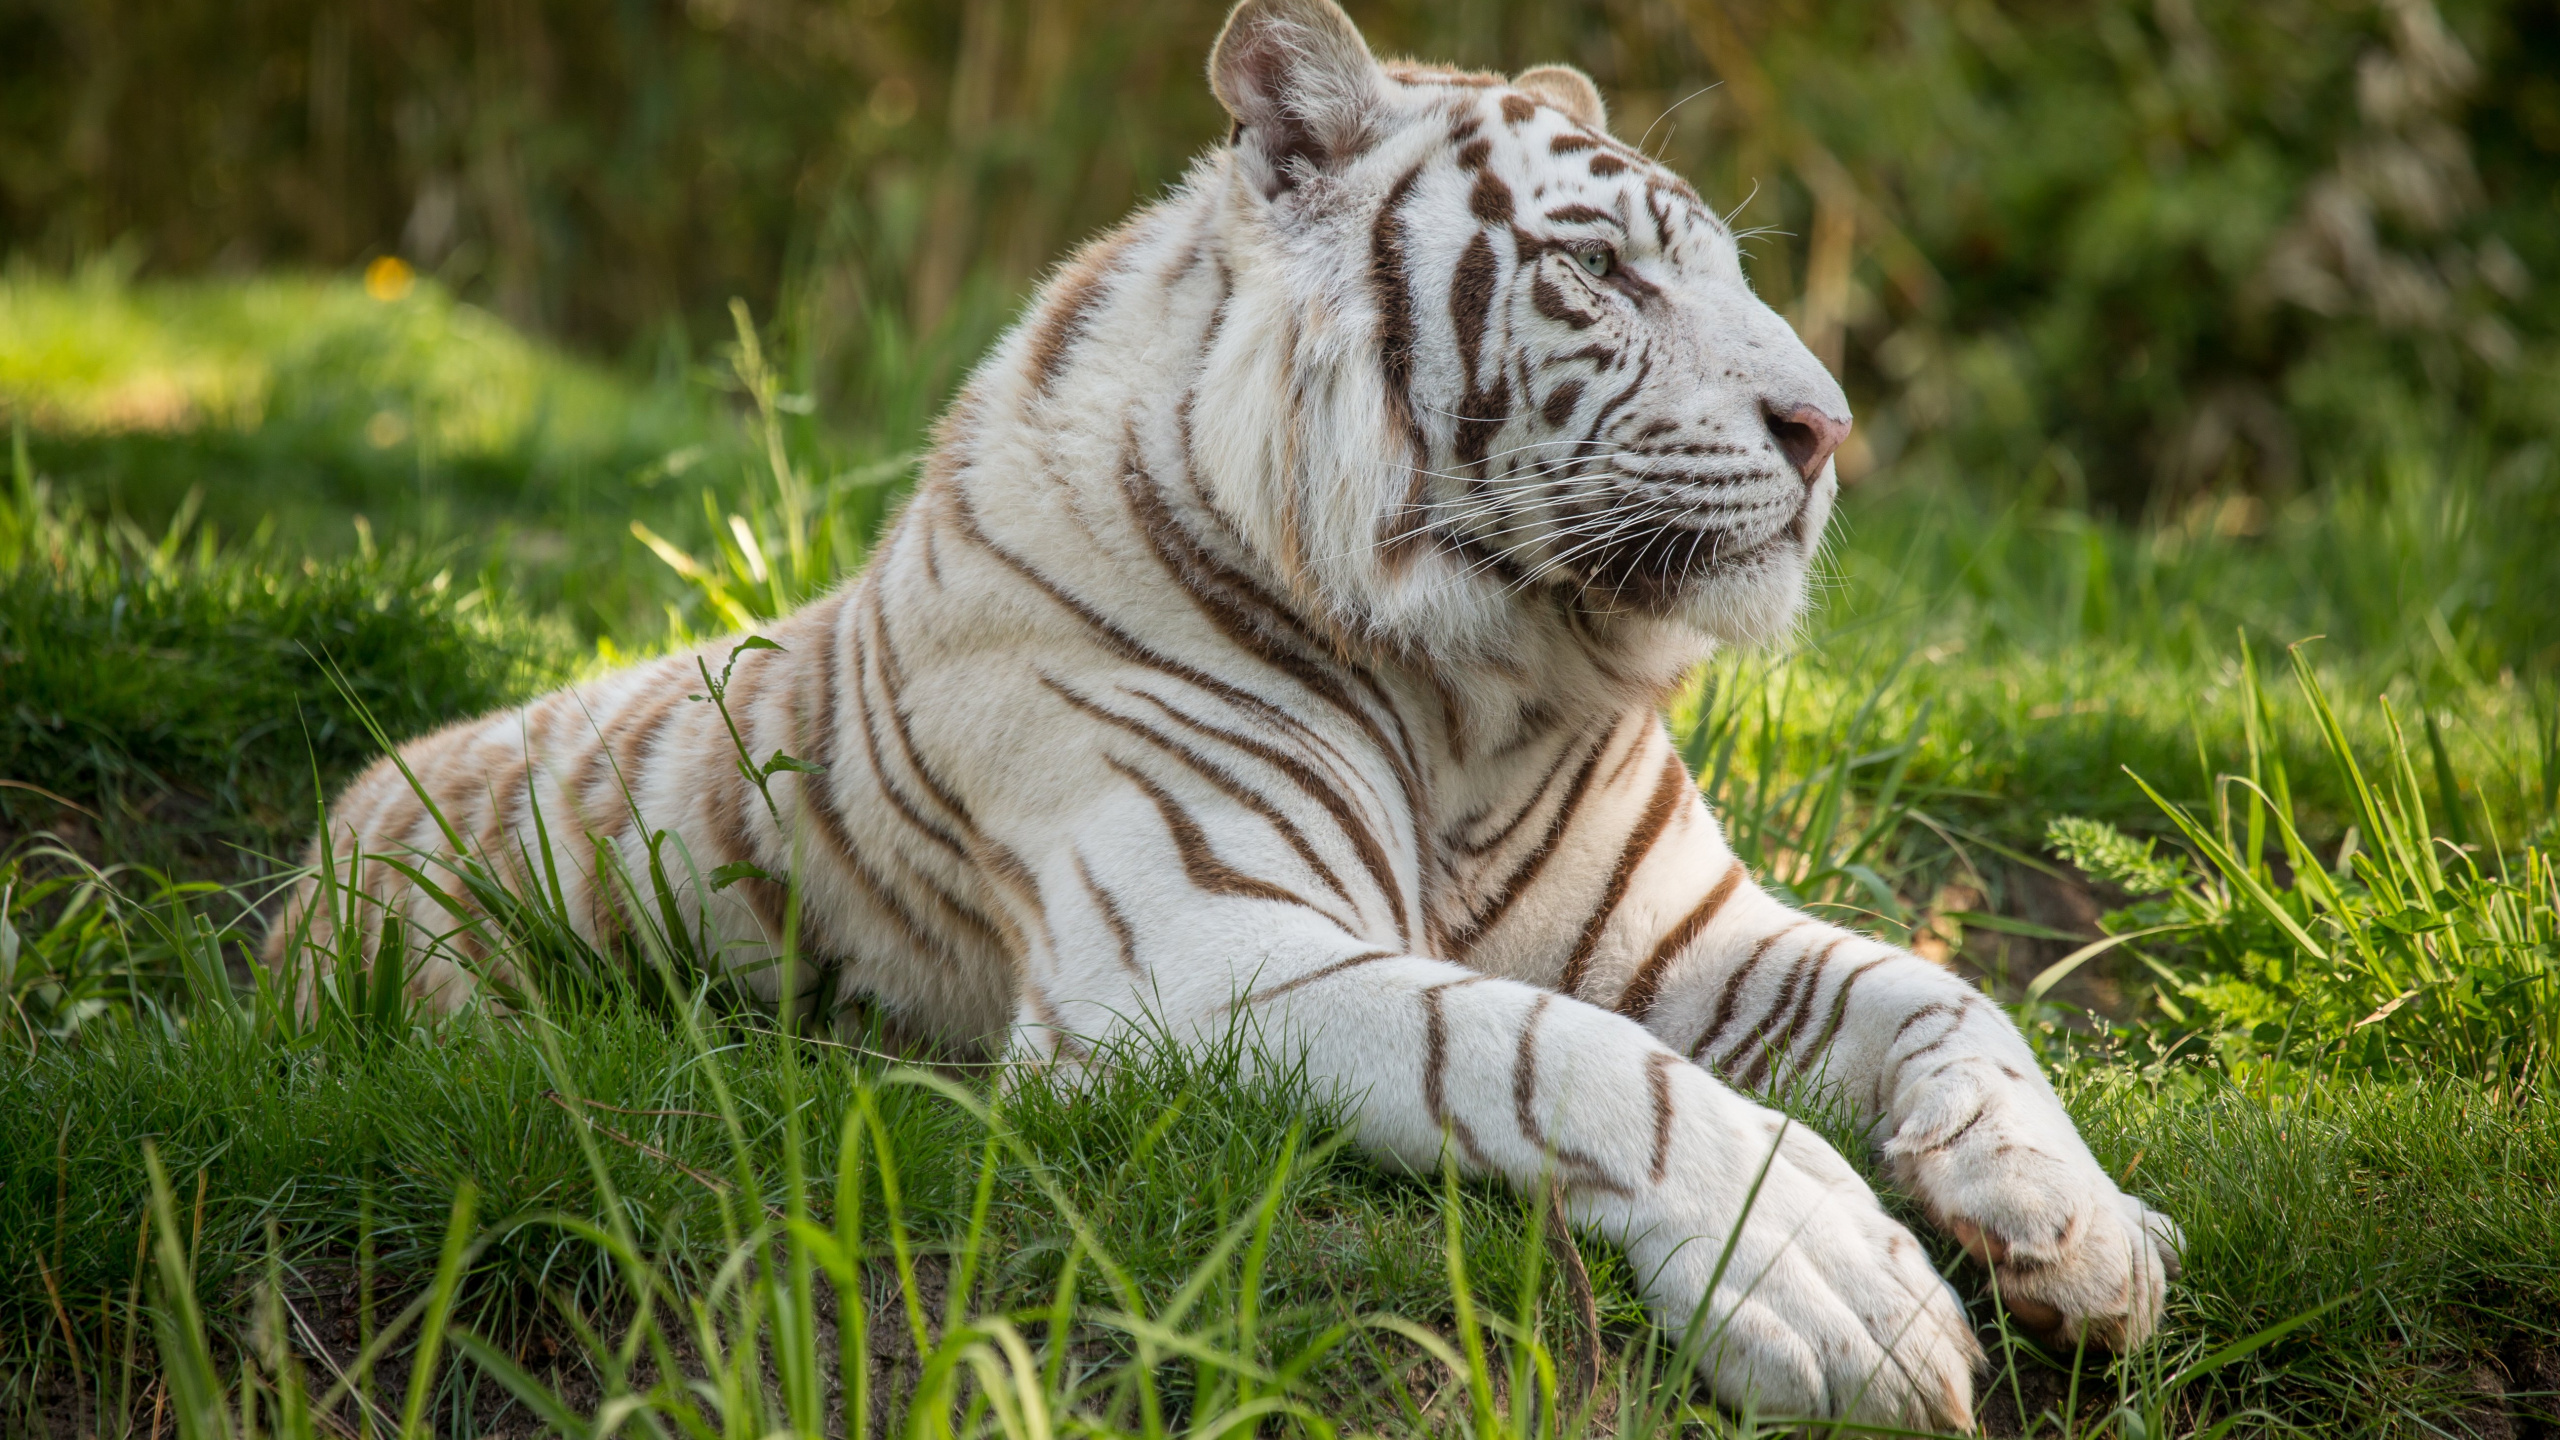 White and Black Tiger Lying on Green Grass During Daytime. Wallpaper in 2560x1440 Resolution